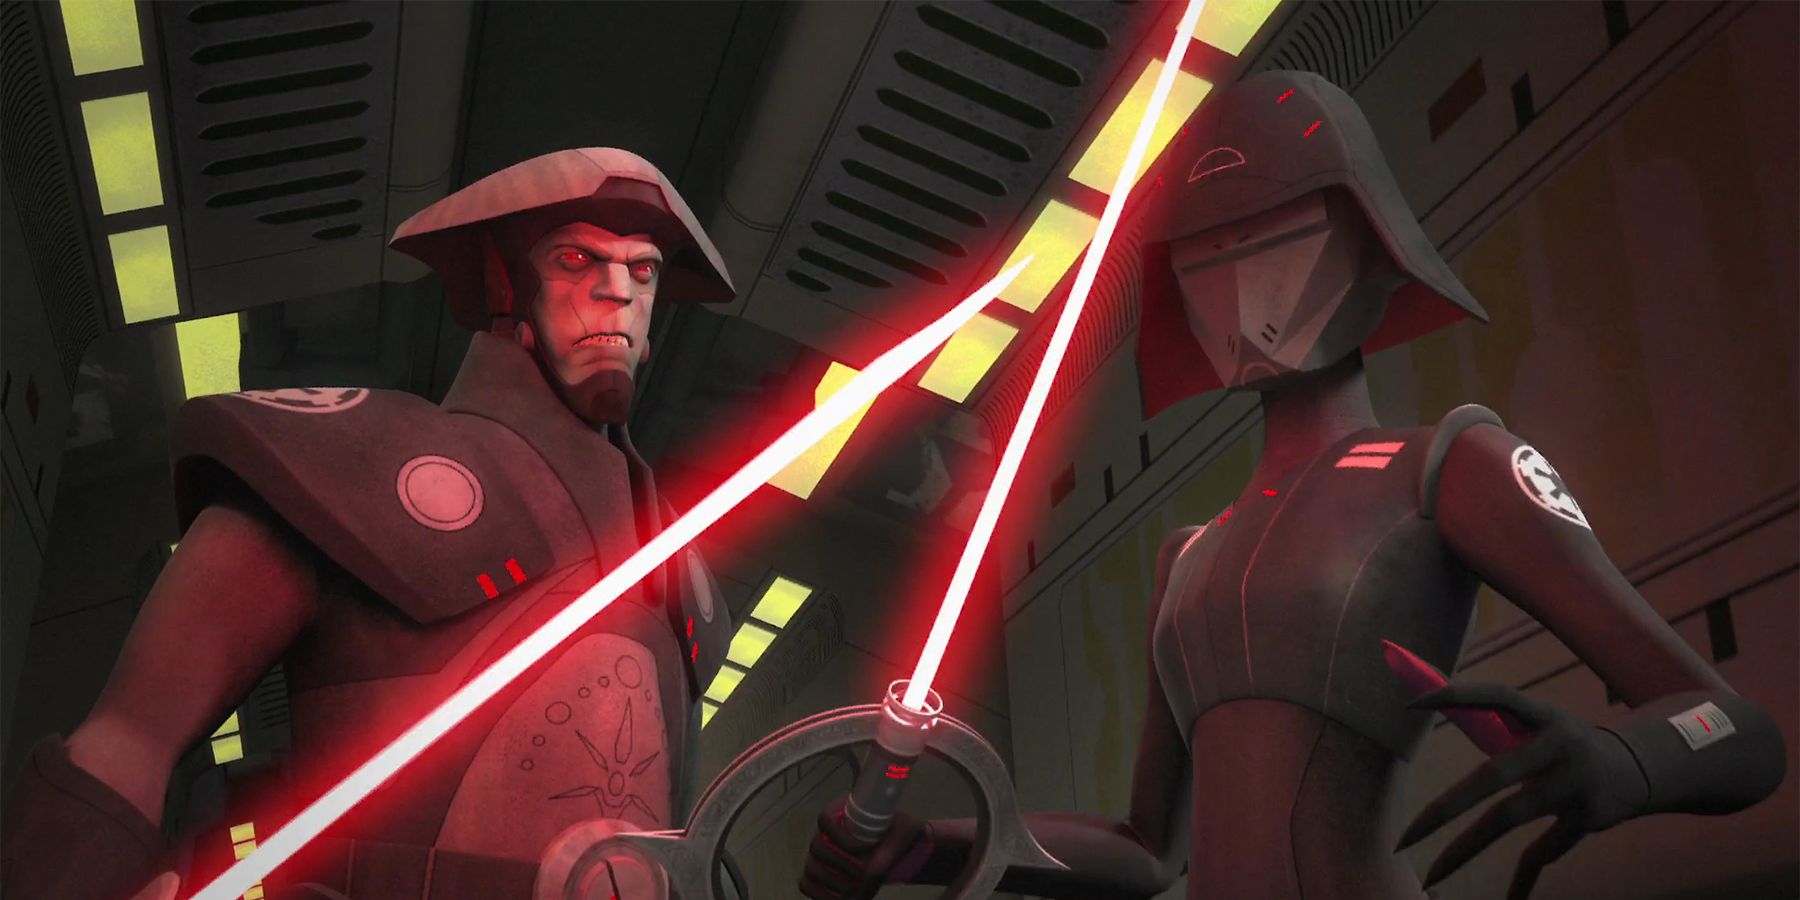  Seventh Sister and Fifth Brother Inquisitors in Star Wars Rebels